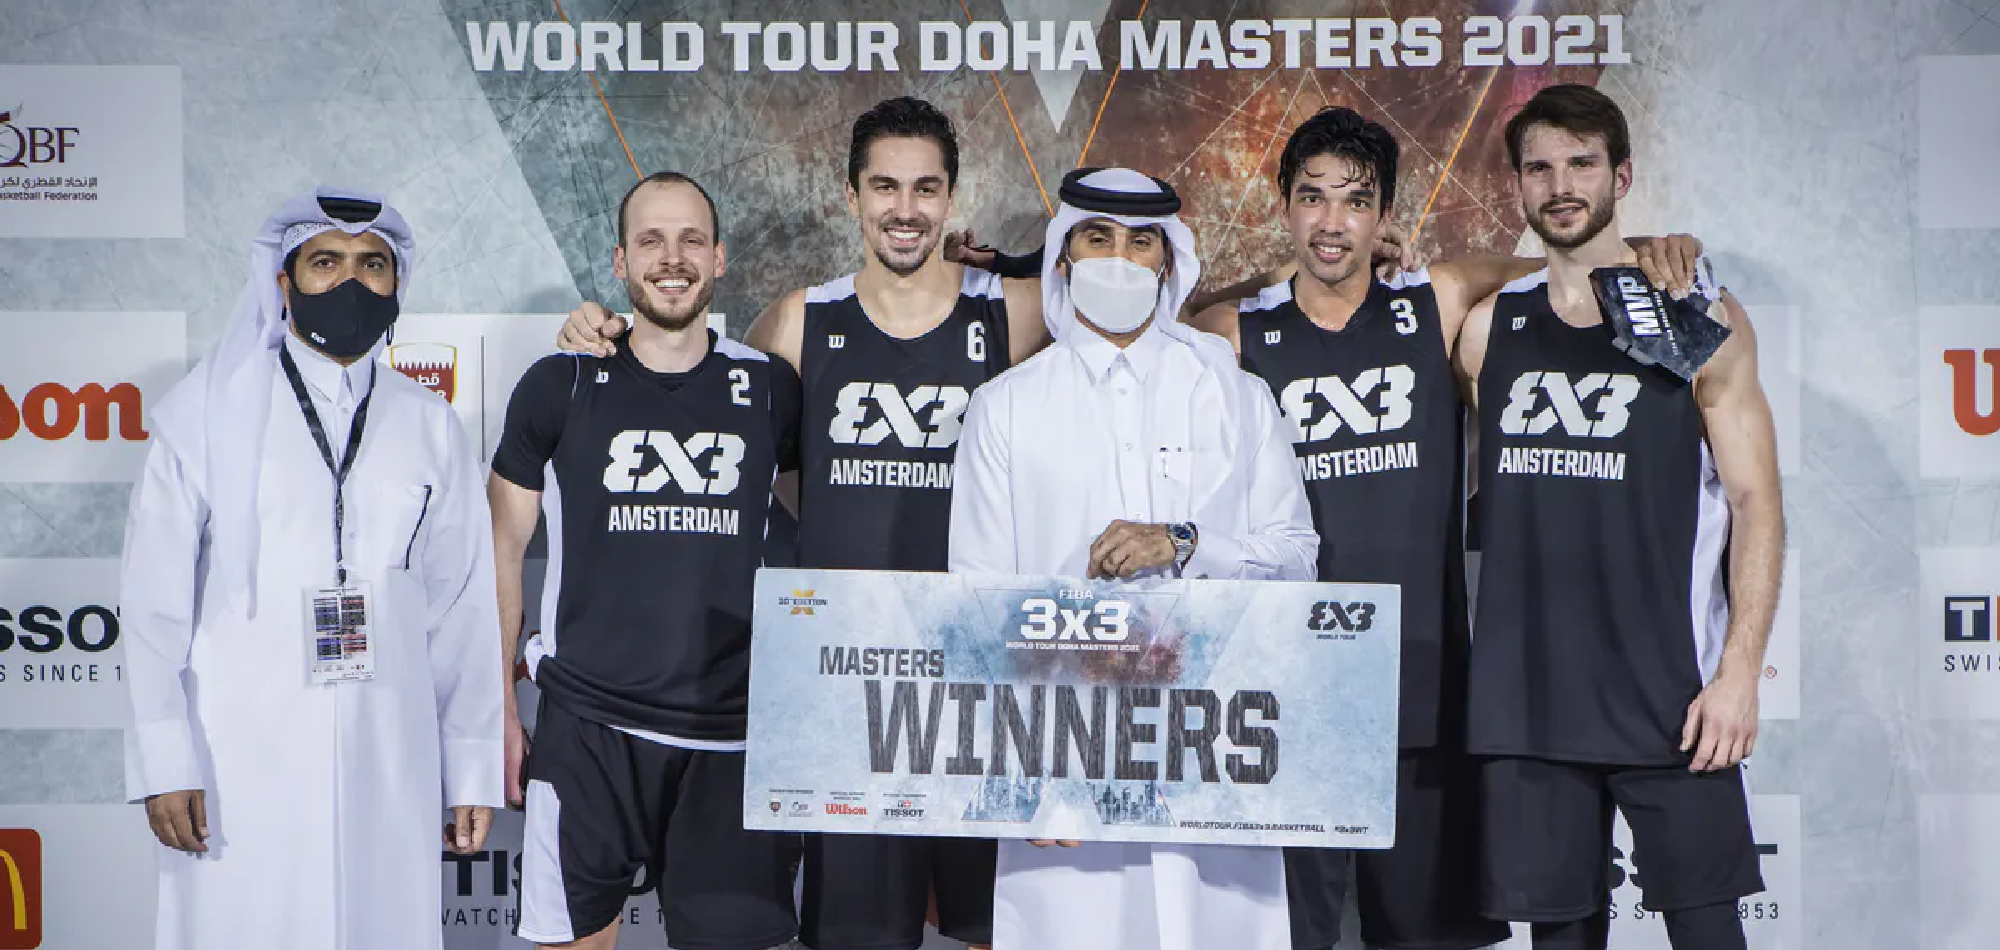  Amsterdam Talent&Pro win first-ever Masters at FIBA 3x3 World Tour Doha Masters 2021